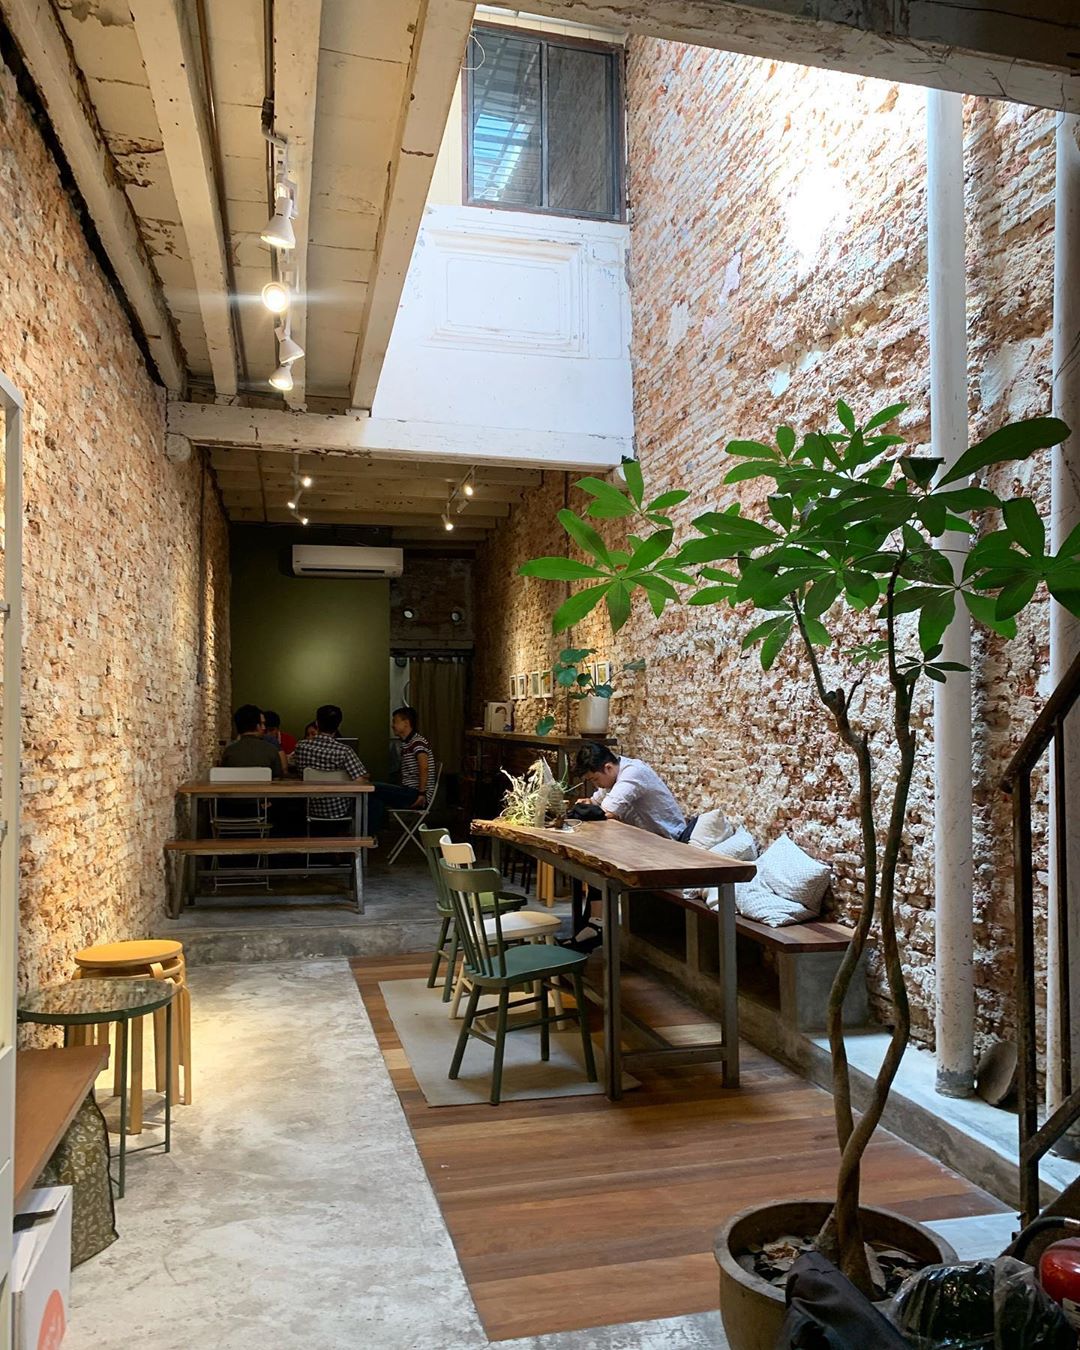 Penang Cafes - Ome by Spacebar Coffee